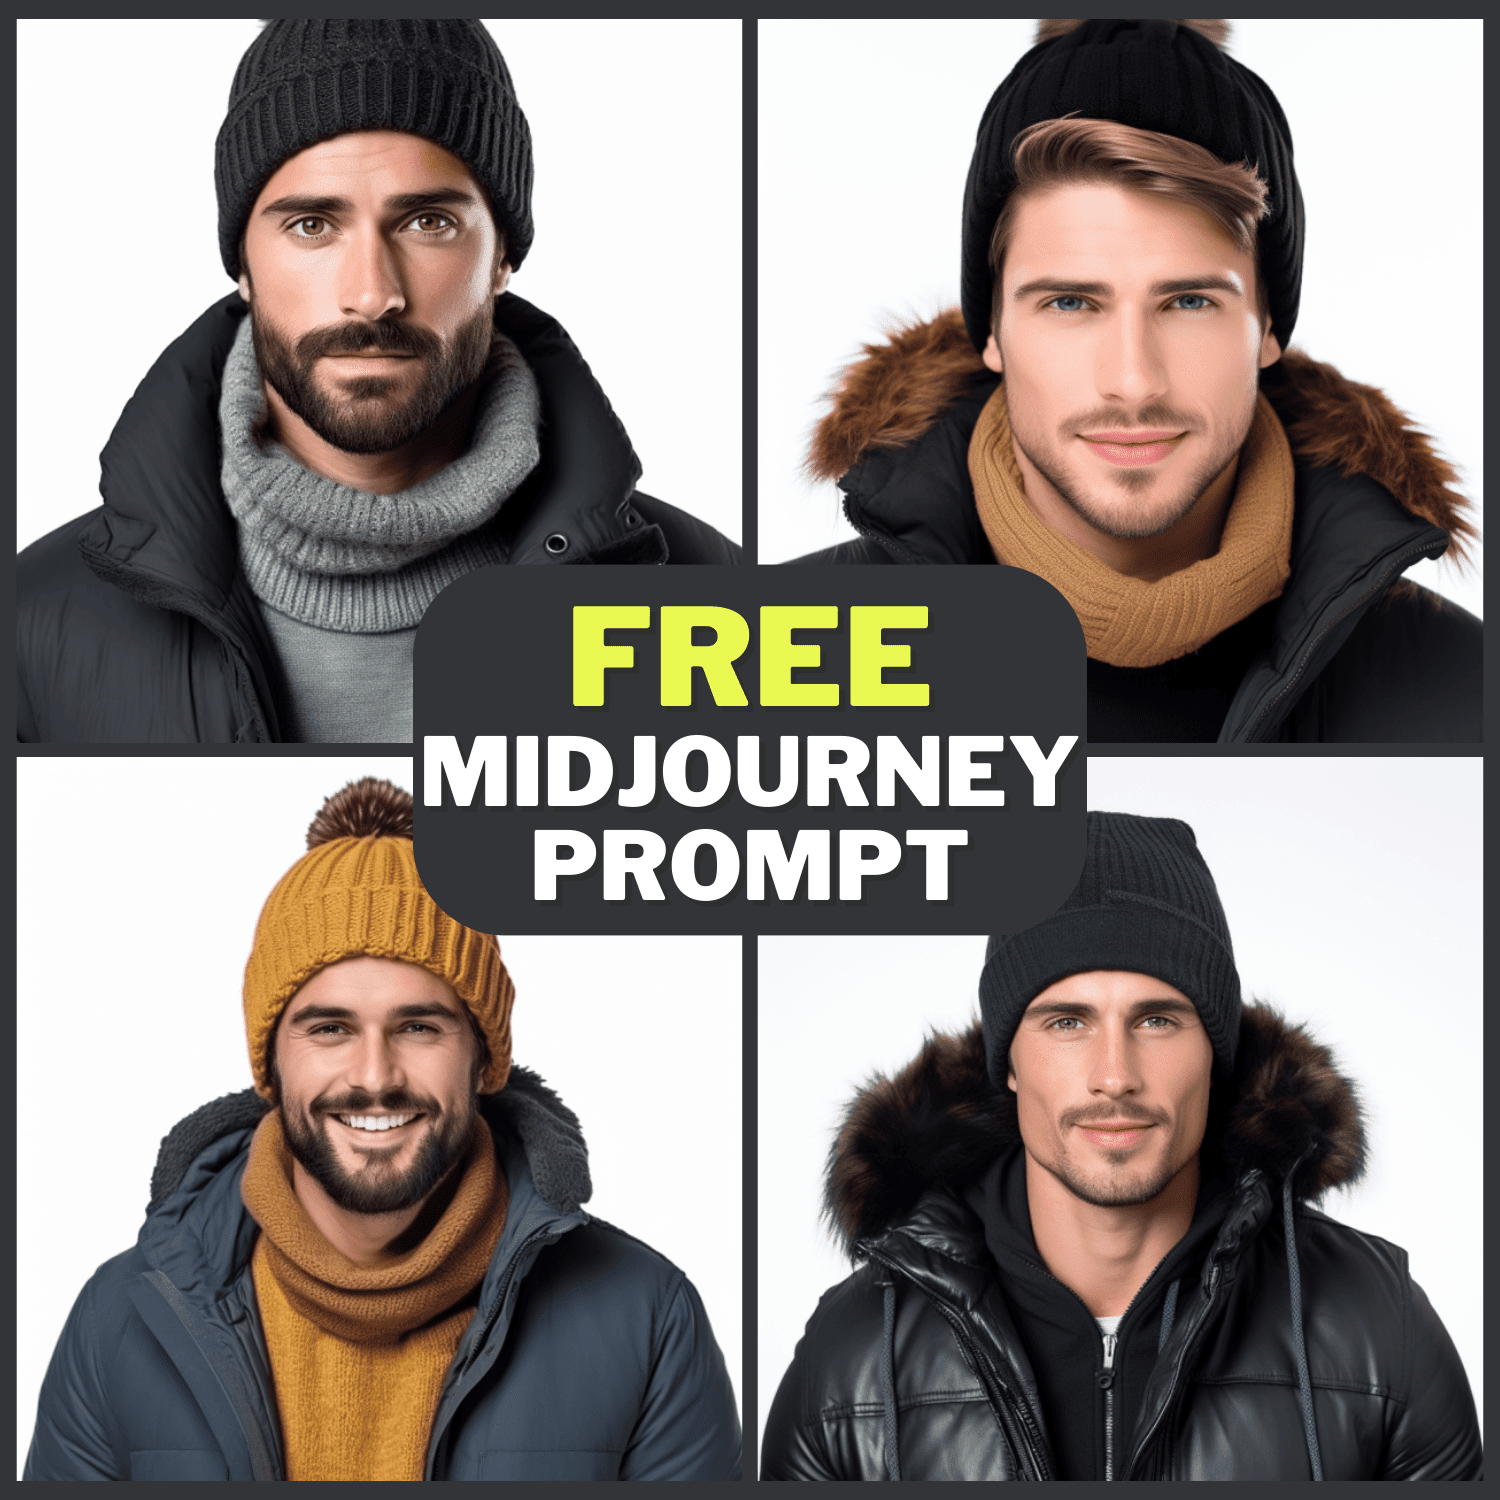 Handsome Man With Winter Hat Free Midjourney Prompt 1